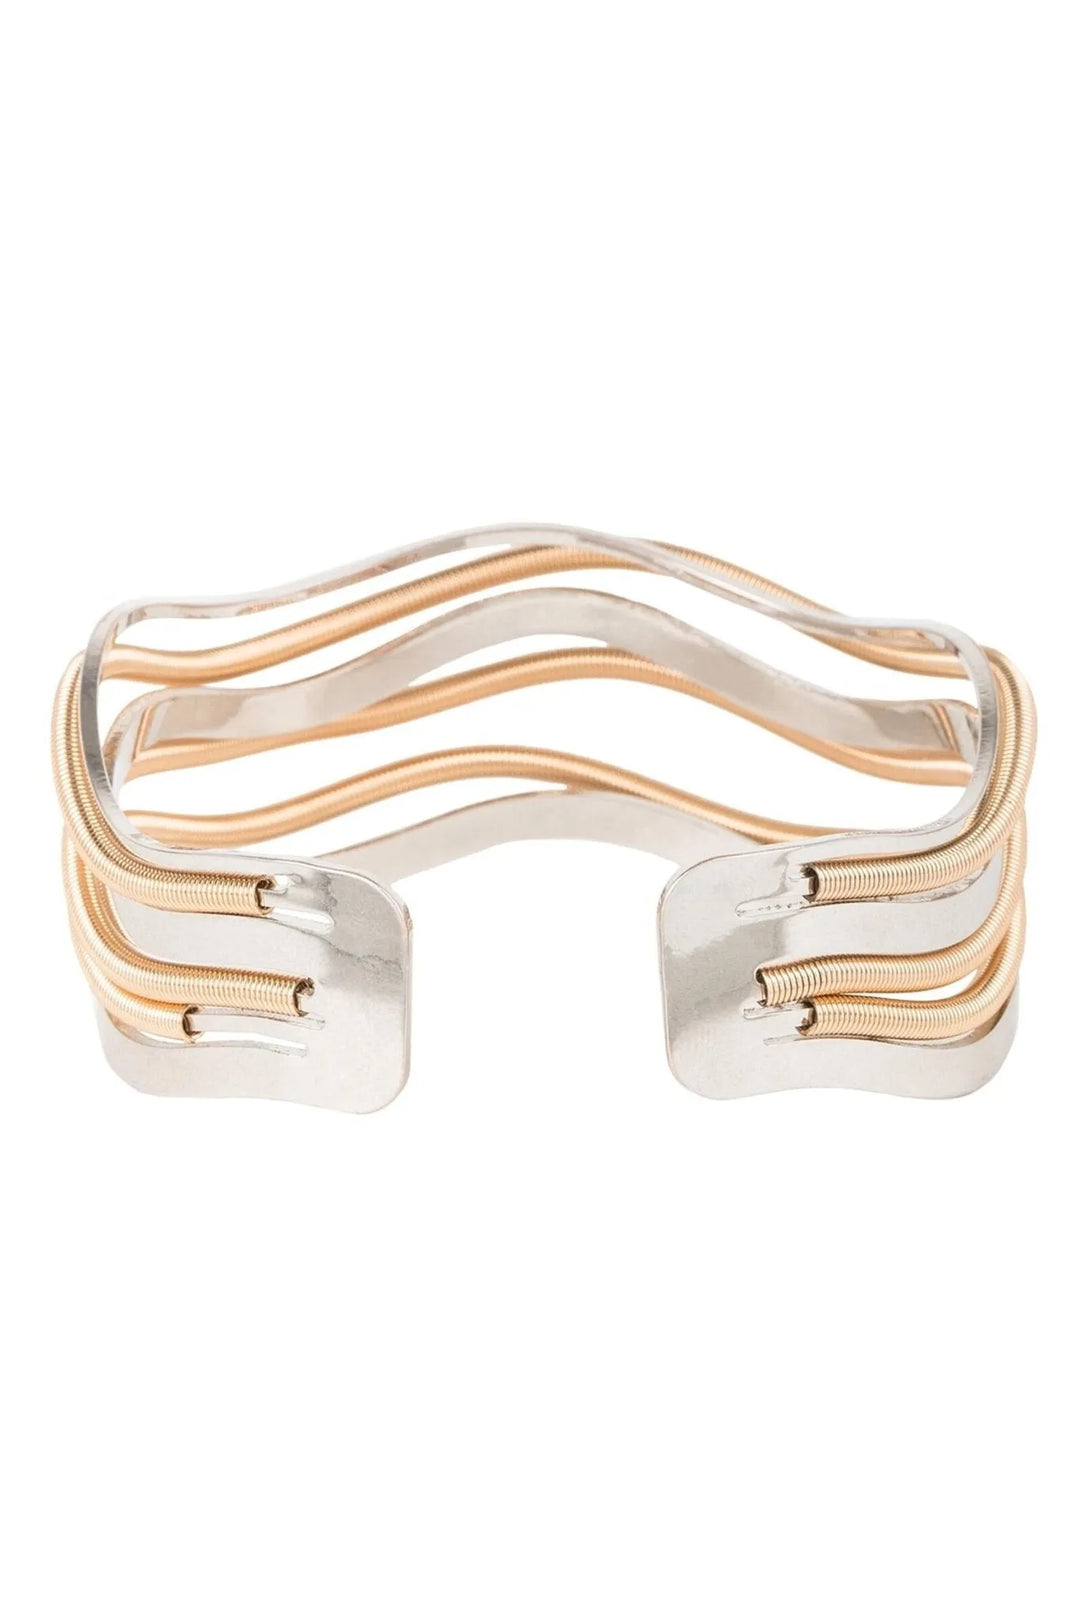 Two Tone Cable Cuff Bracelet Gold